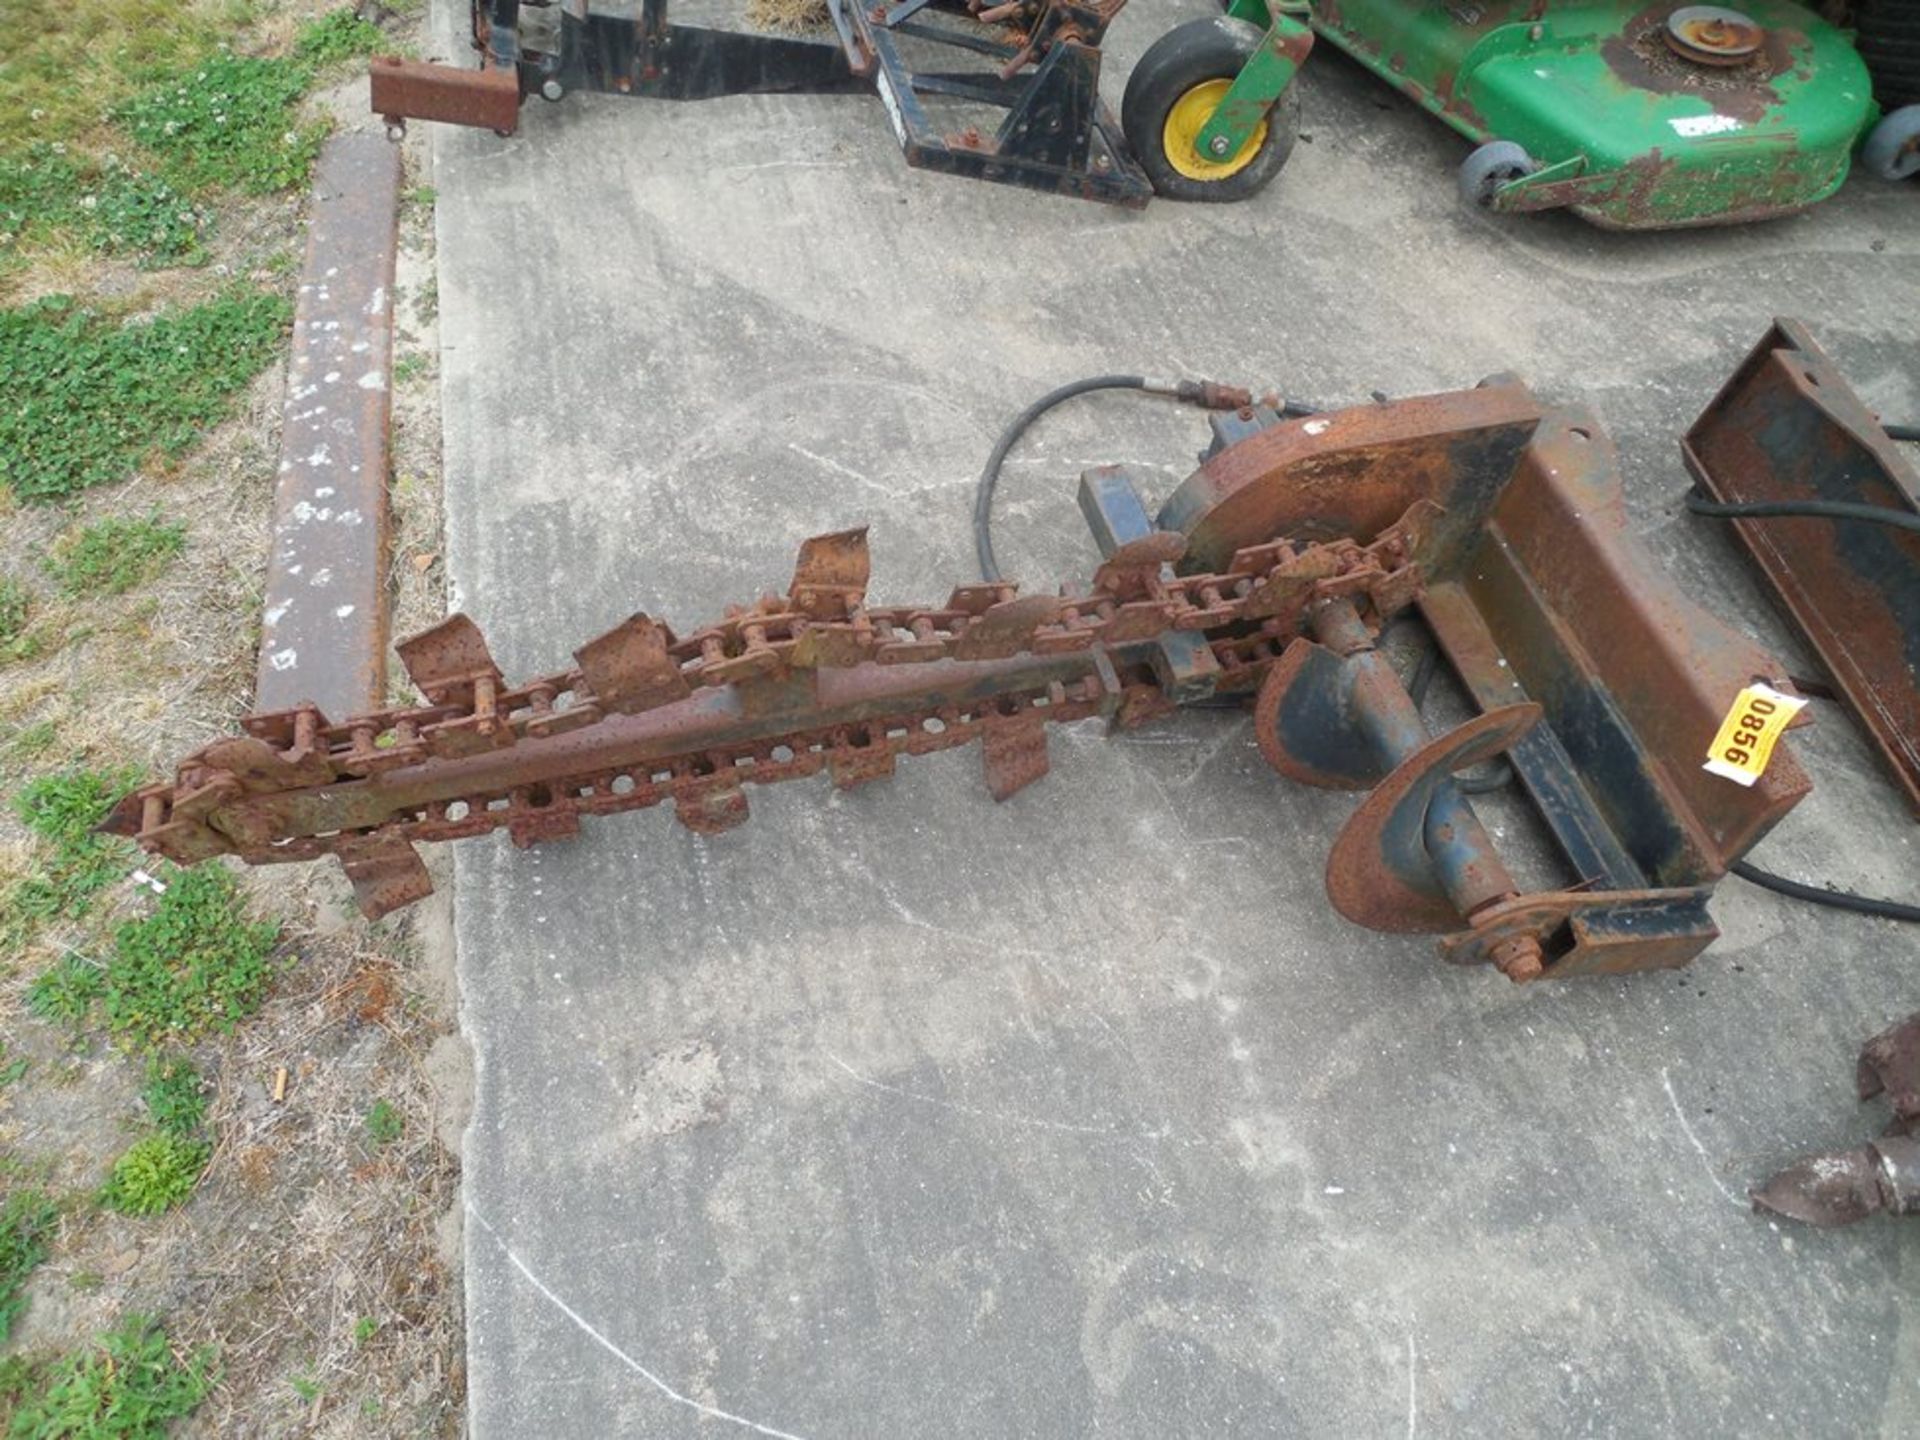 Mini Skid Steer hydraulic trencher poor condition